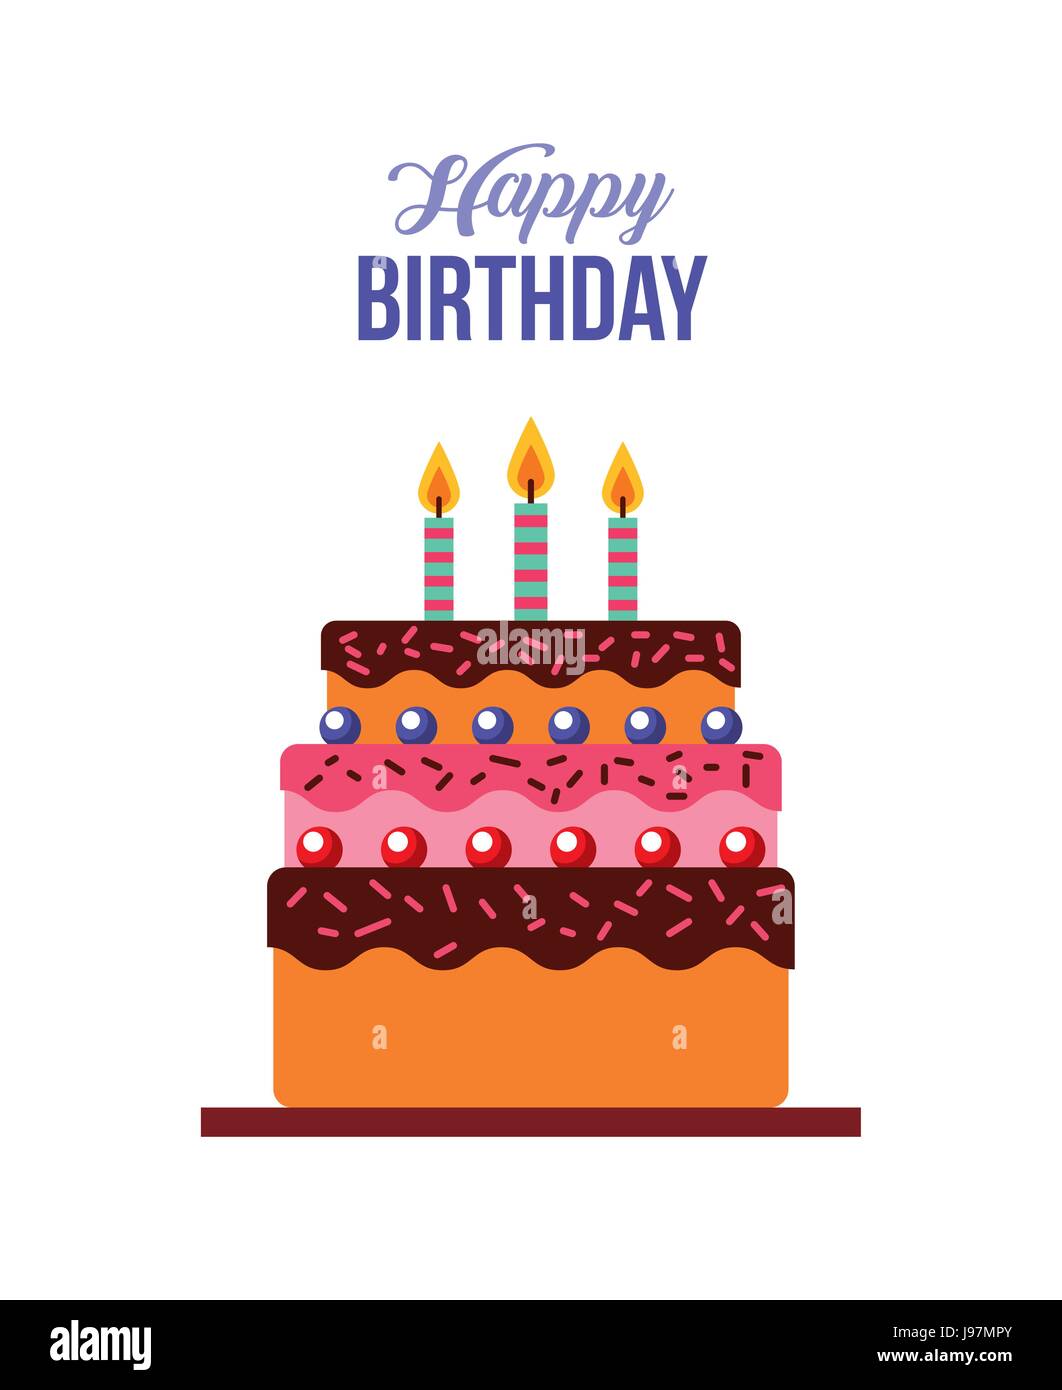 Birthday Cake Illustration Cut Out Stock Images Pictures Alamy